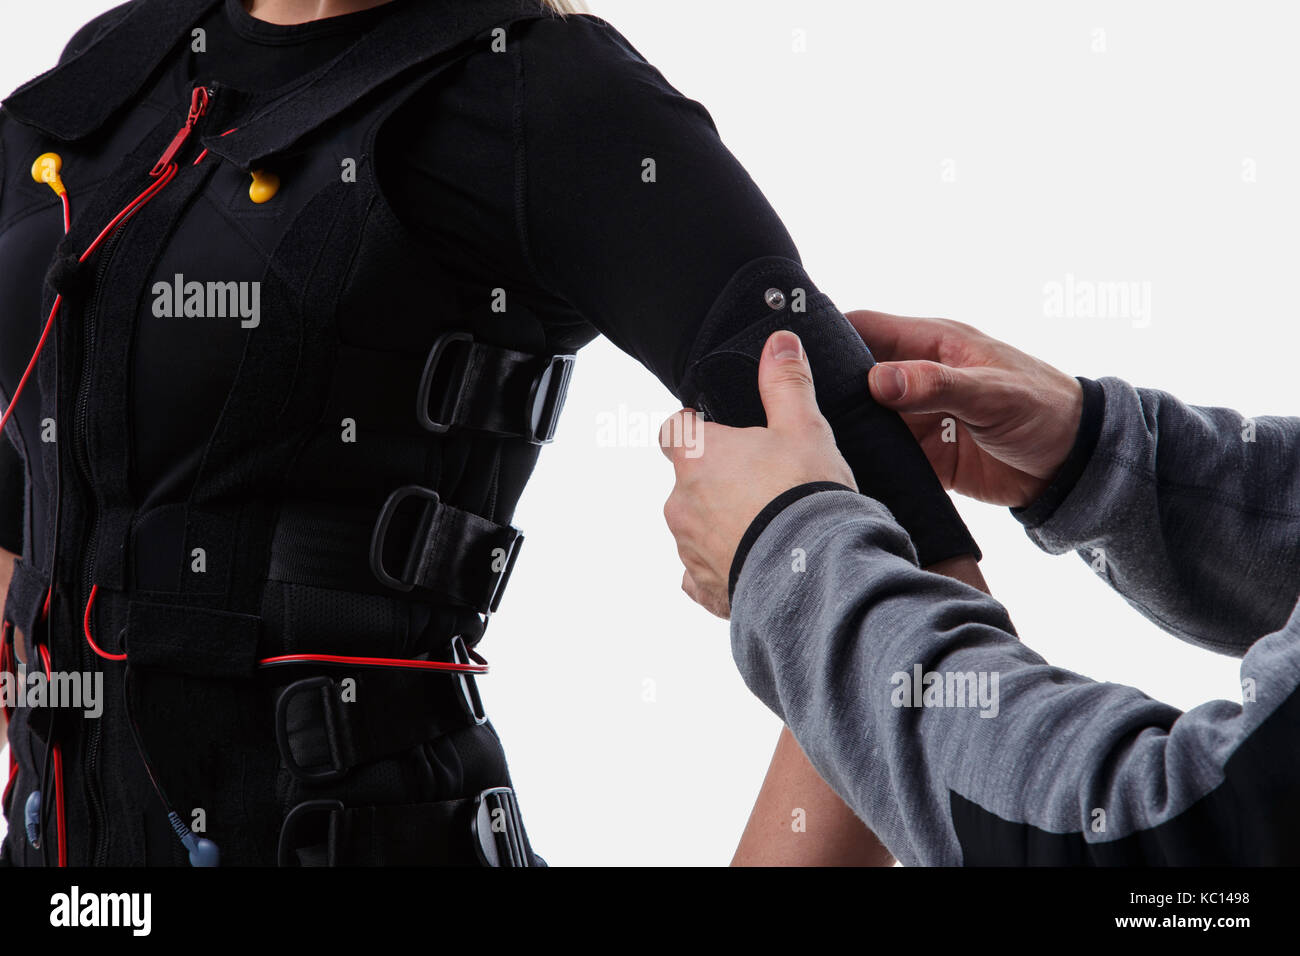 Trainer helps woman attaching electrode on ems suit, isolated on white background Stock Photo